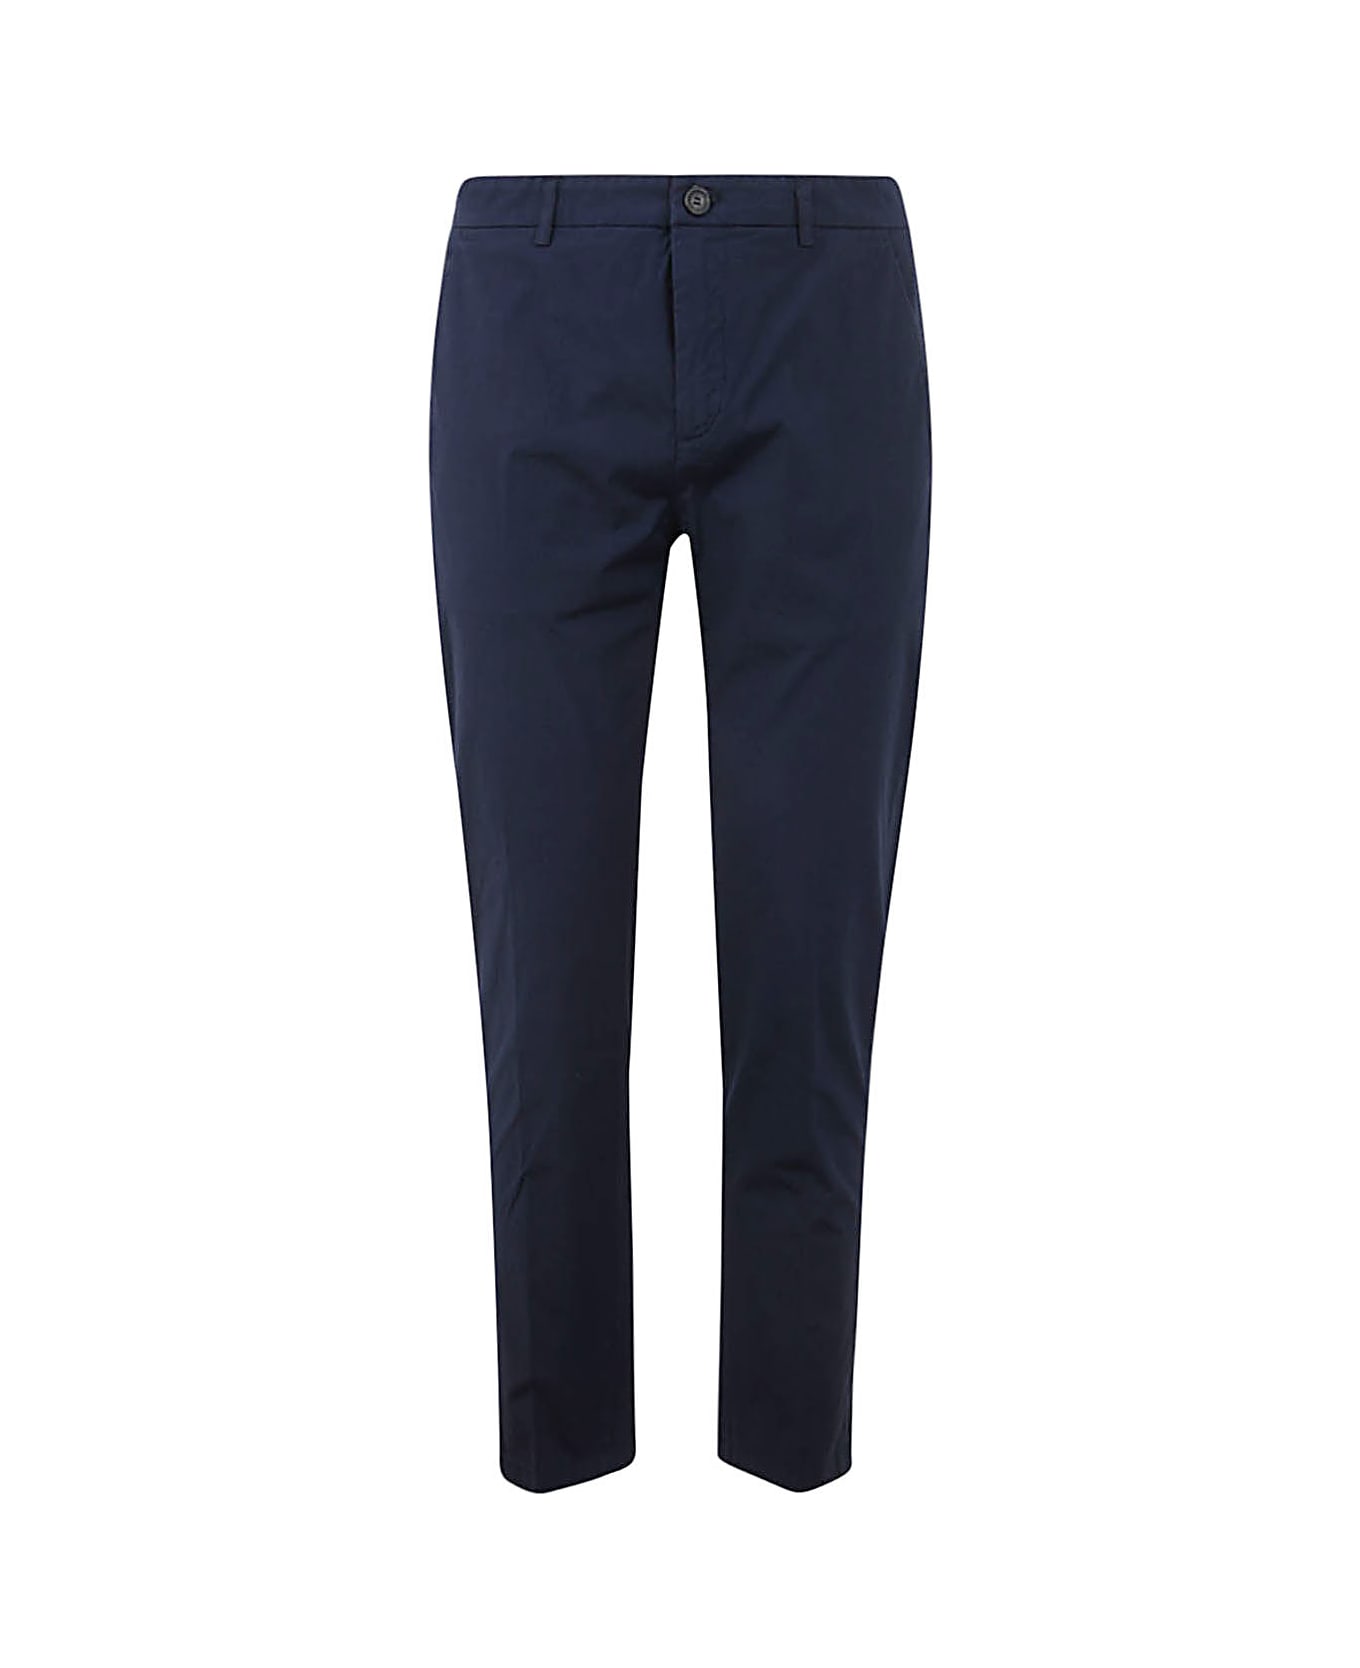 Department Five Prince Crop Chino Trousers - Navy ボトムス